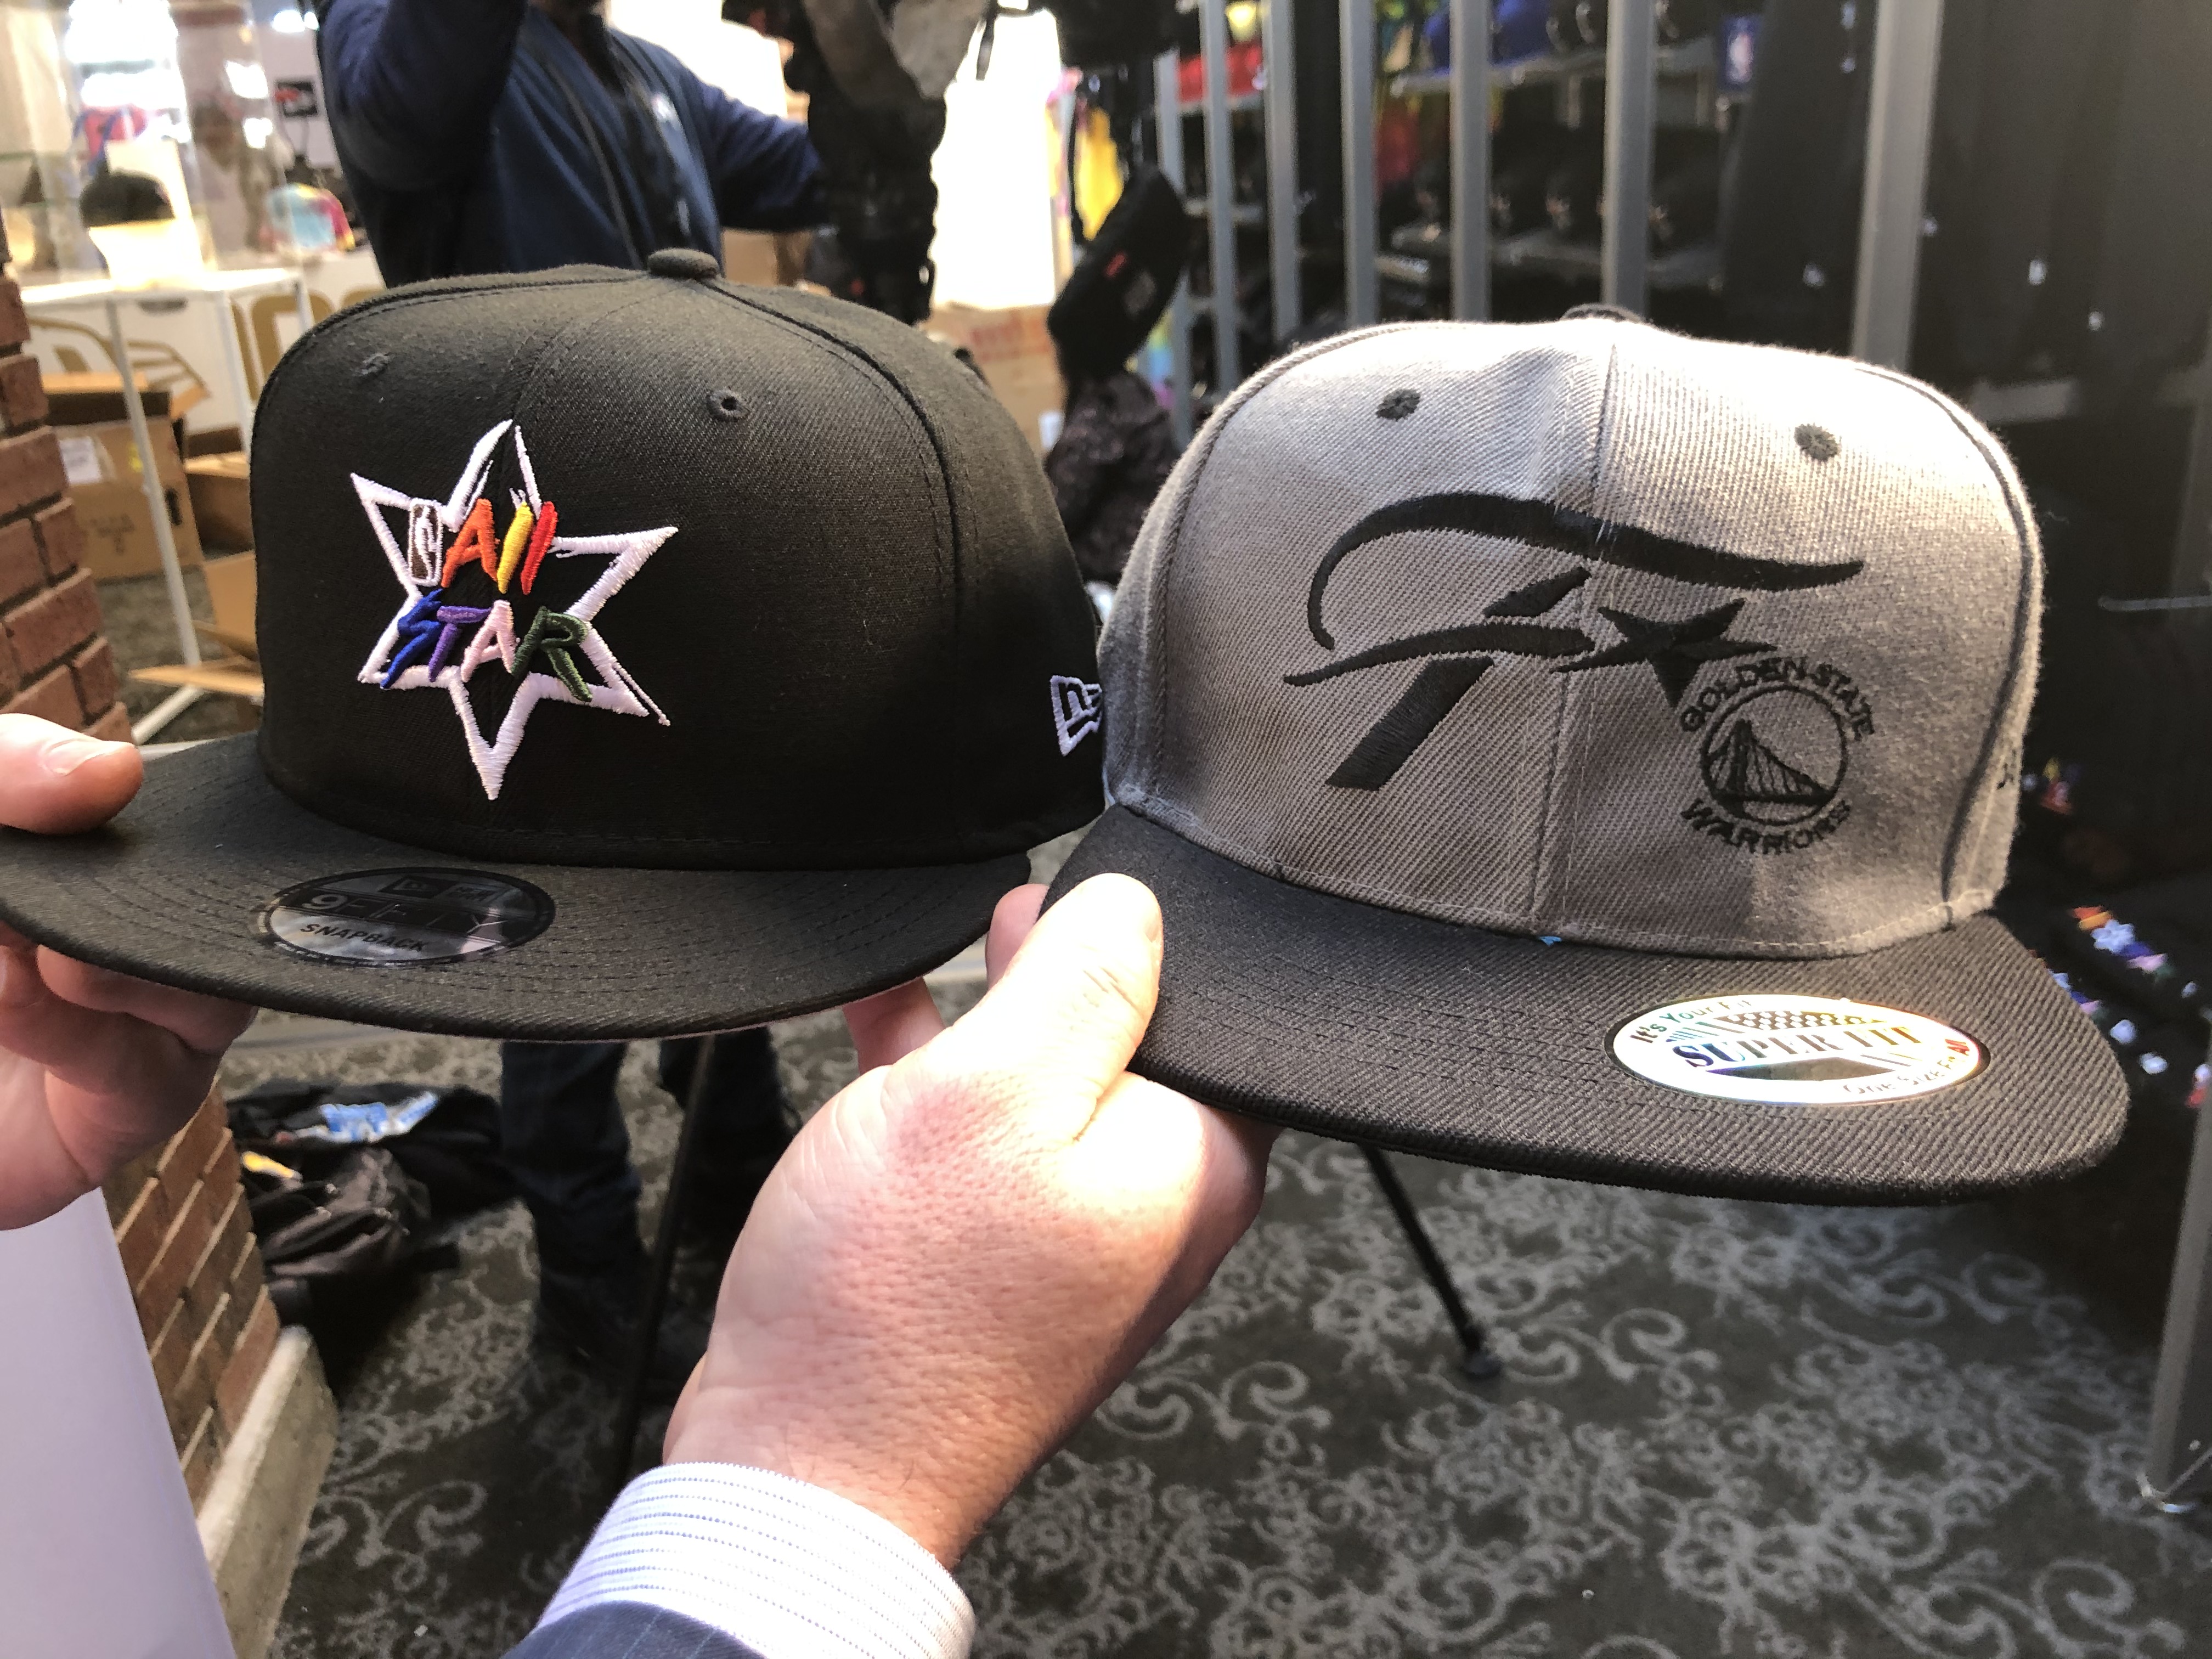 NBA All Star Game 2020: Look out for fake All-Star jerseys, hats